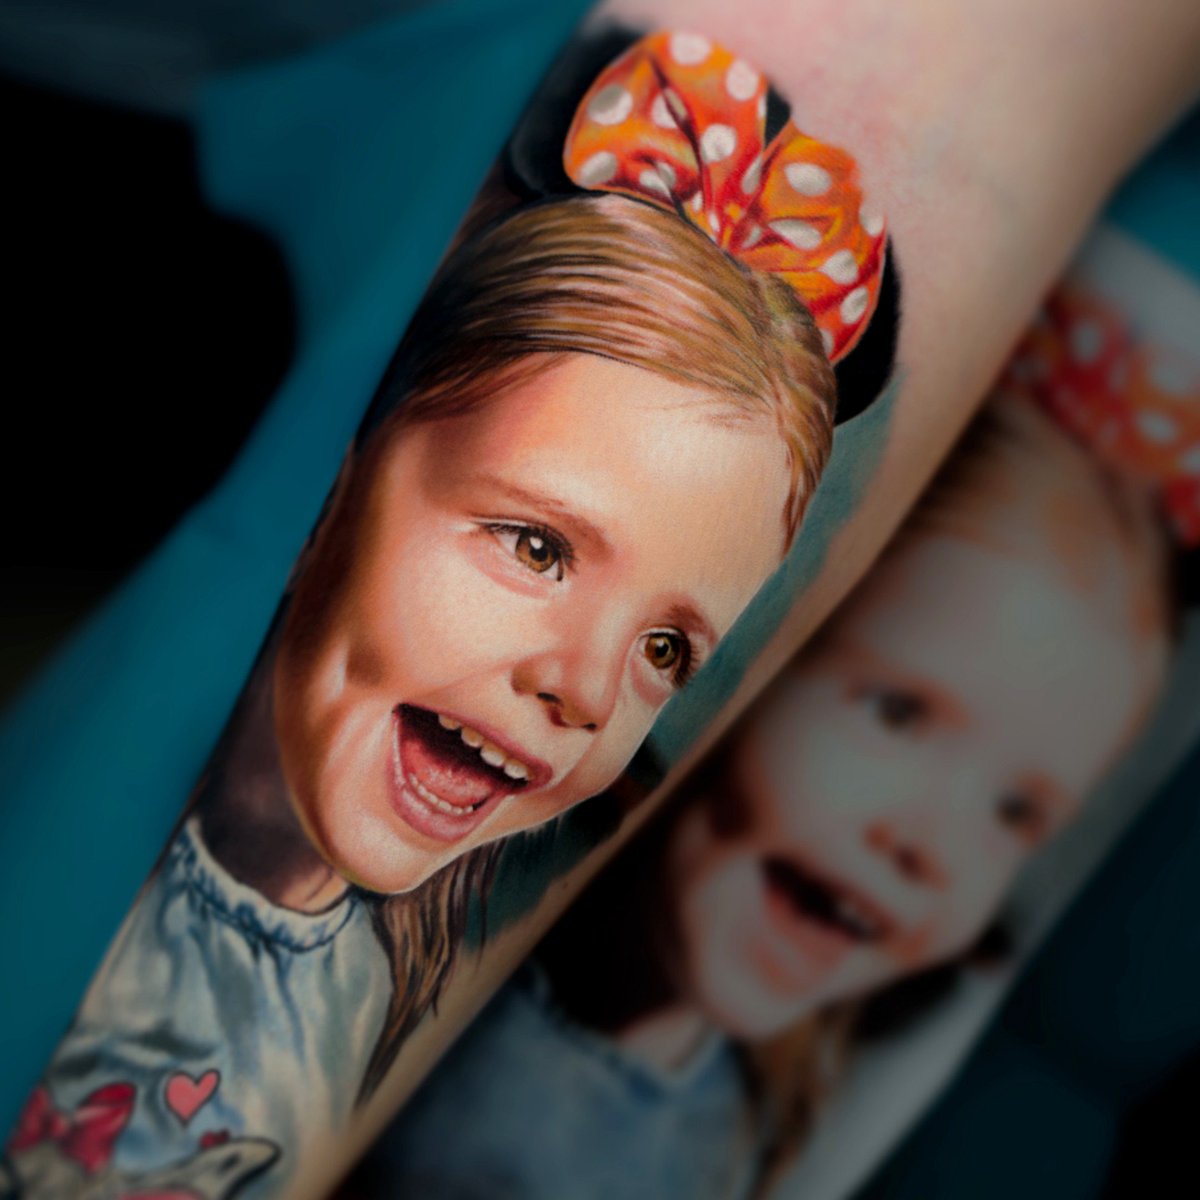 hyper-realistic tattoo by Drew Apicture (23) - KickAss Things